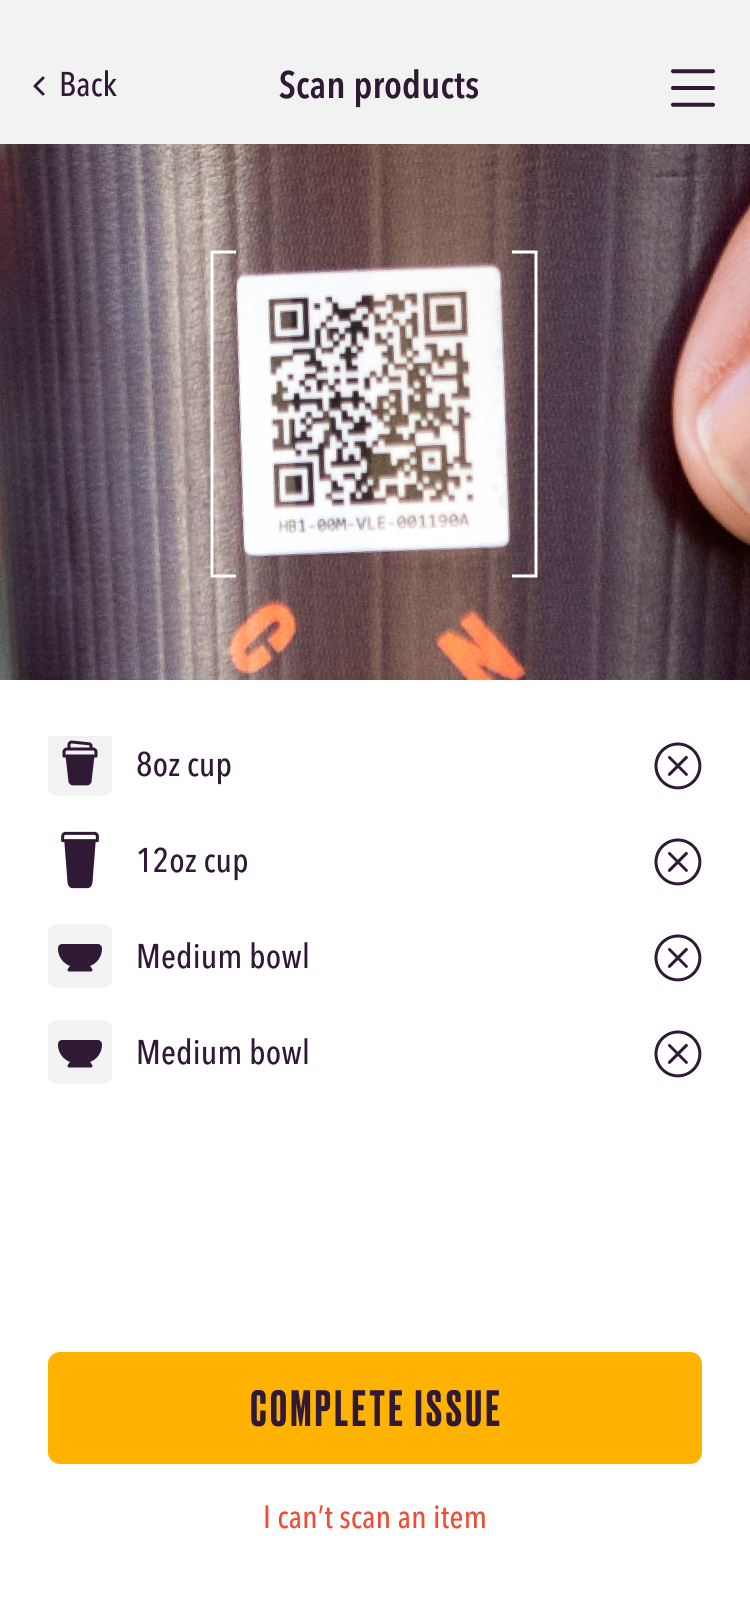 The issue product screen in the trader app. The top half of the screen is a view through the device's camera, showing a cup's QR code being scanned. Underneath, there's a list of items that have been scanned.